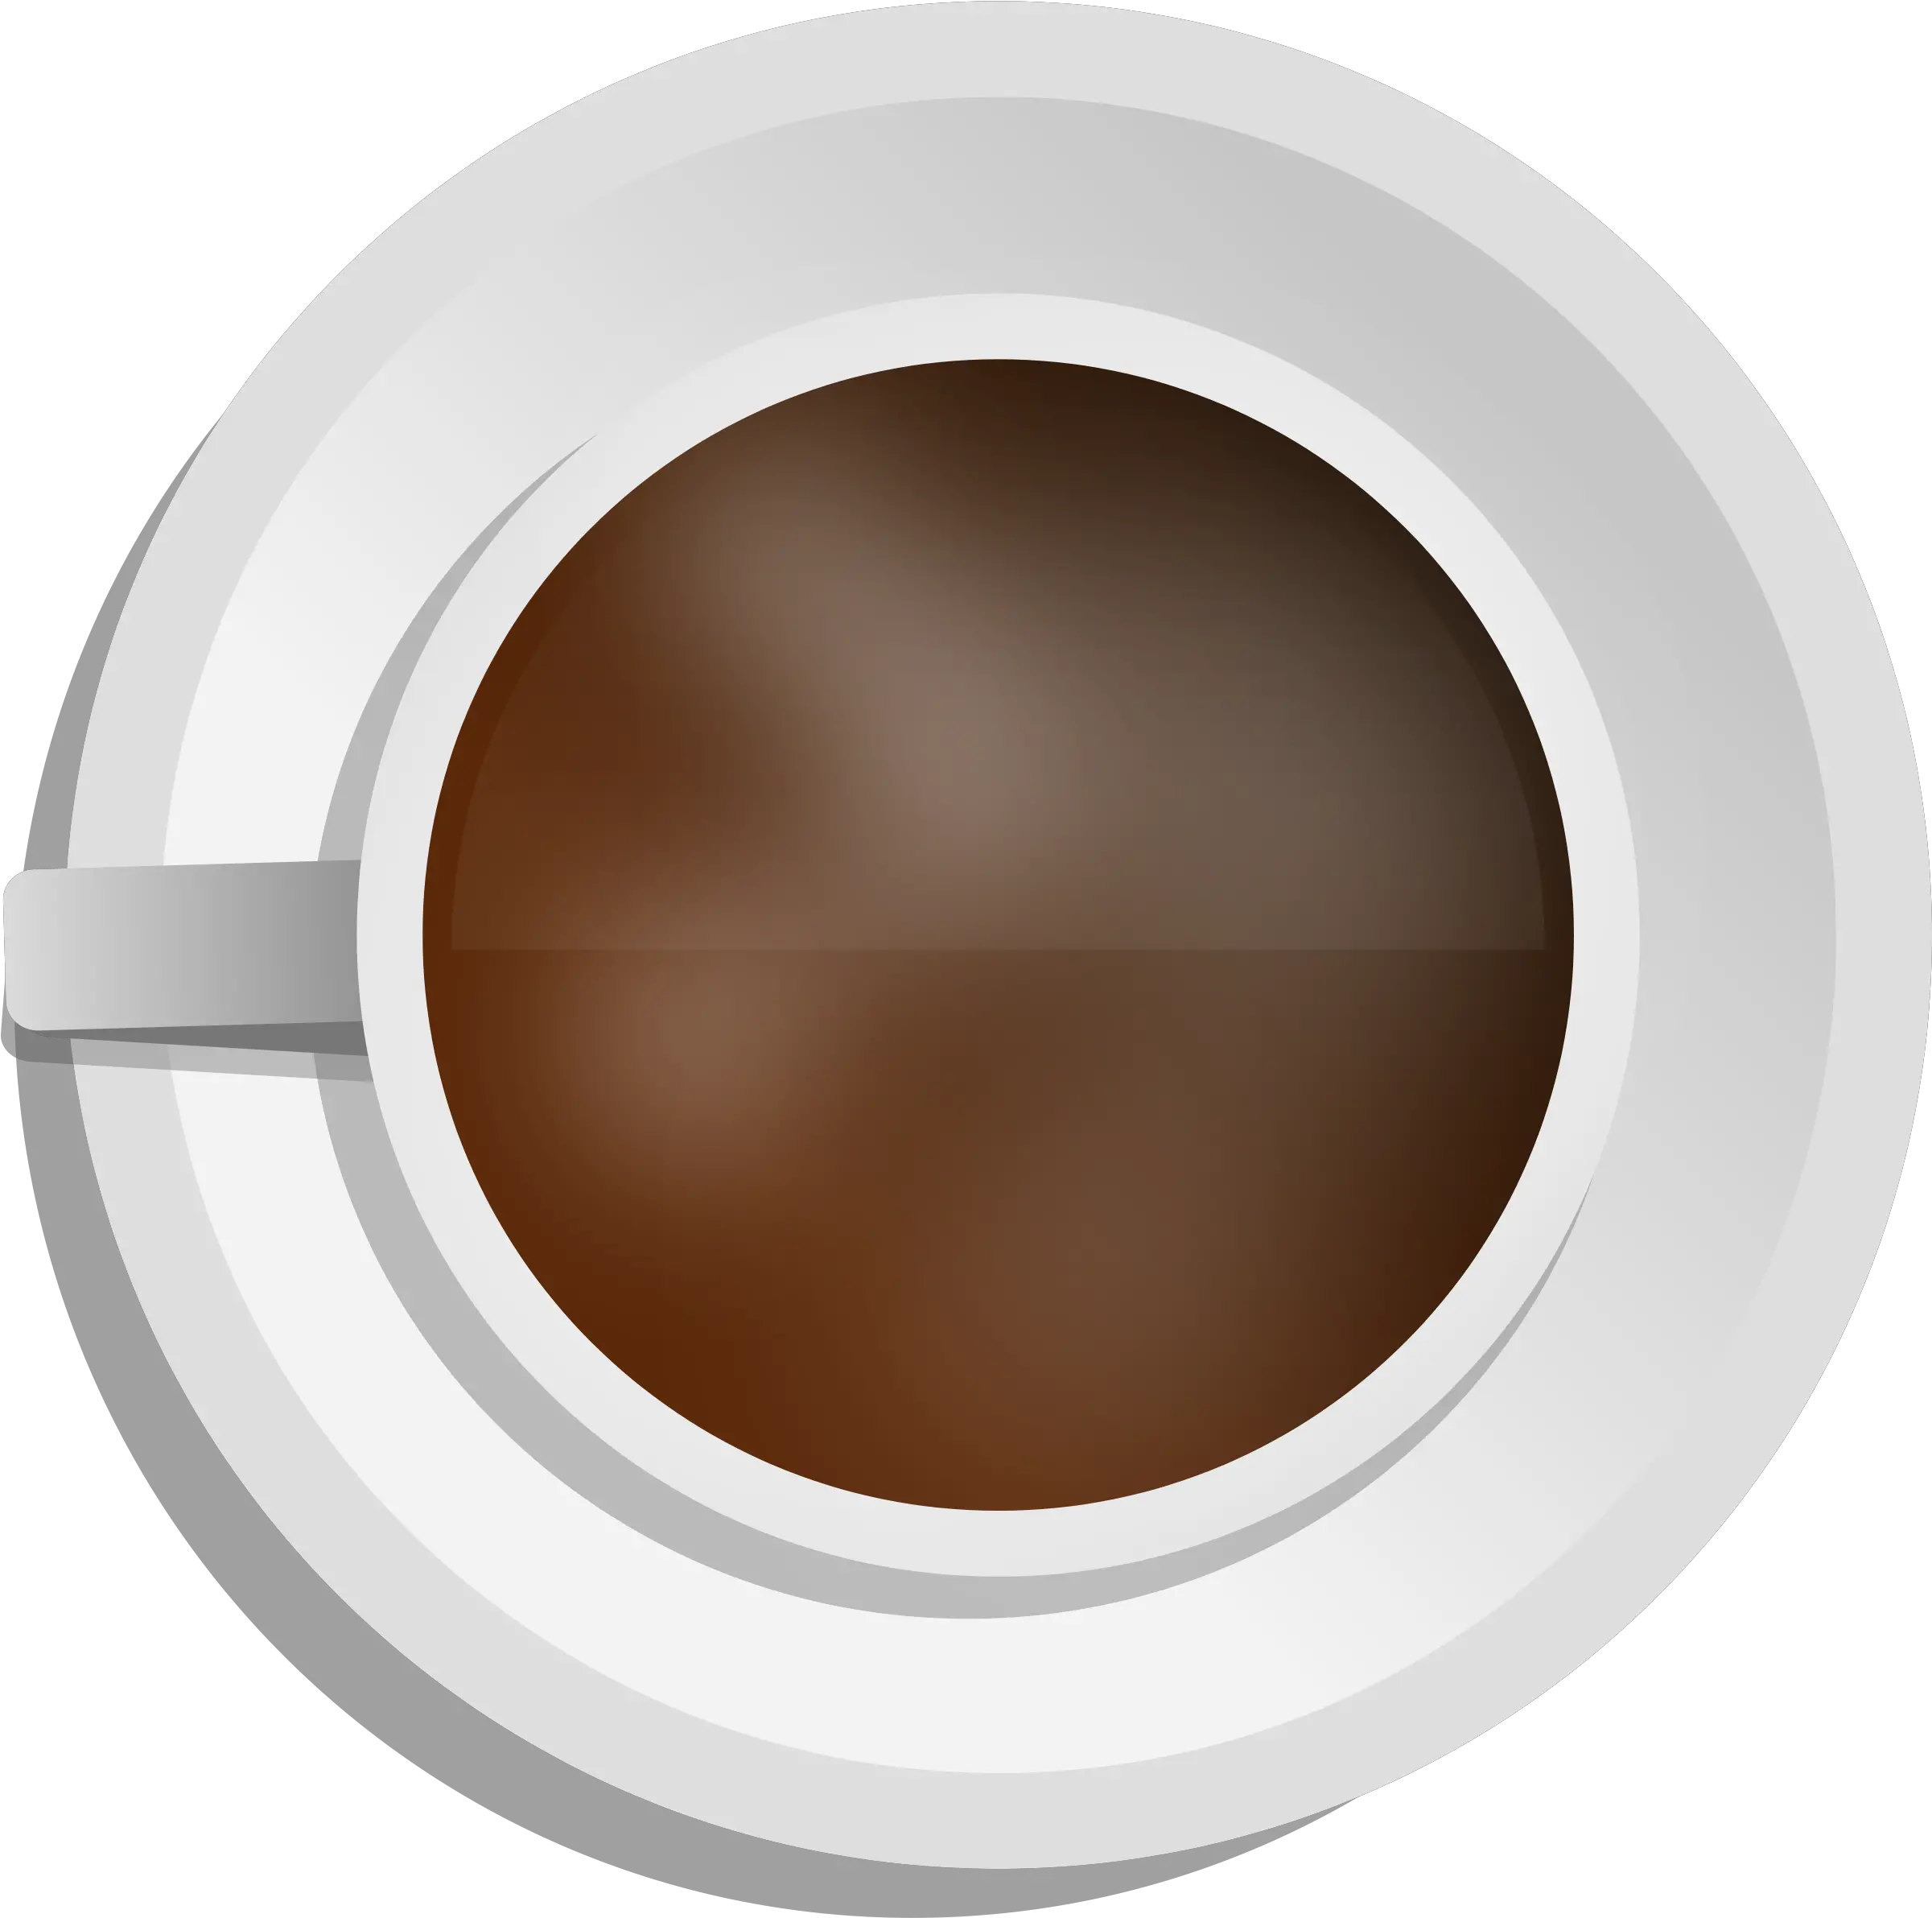 Download Cup Mug Coffee Png Image For Free Cartoon Coffee Cup Top View Cup Of Coffee Transparent Background